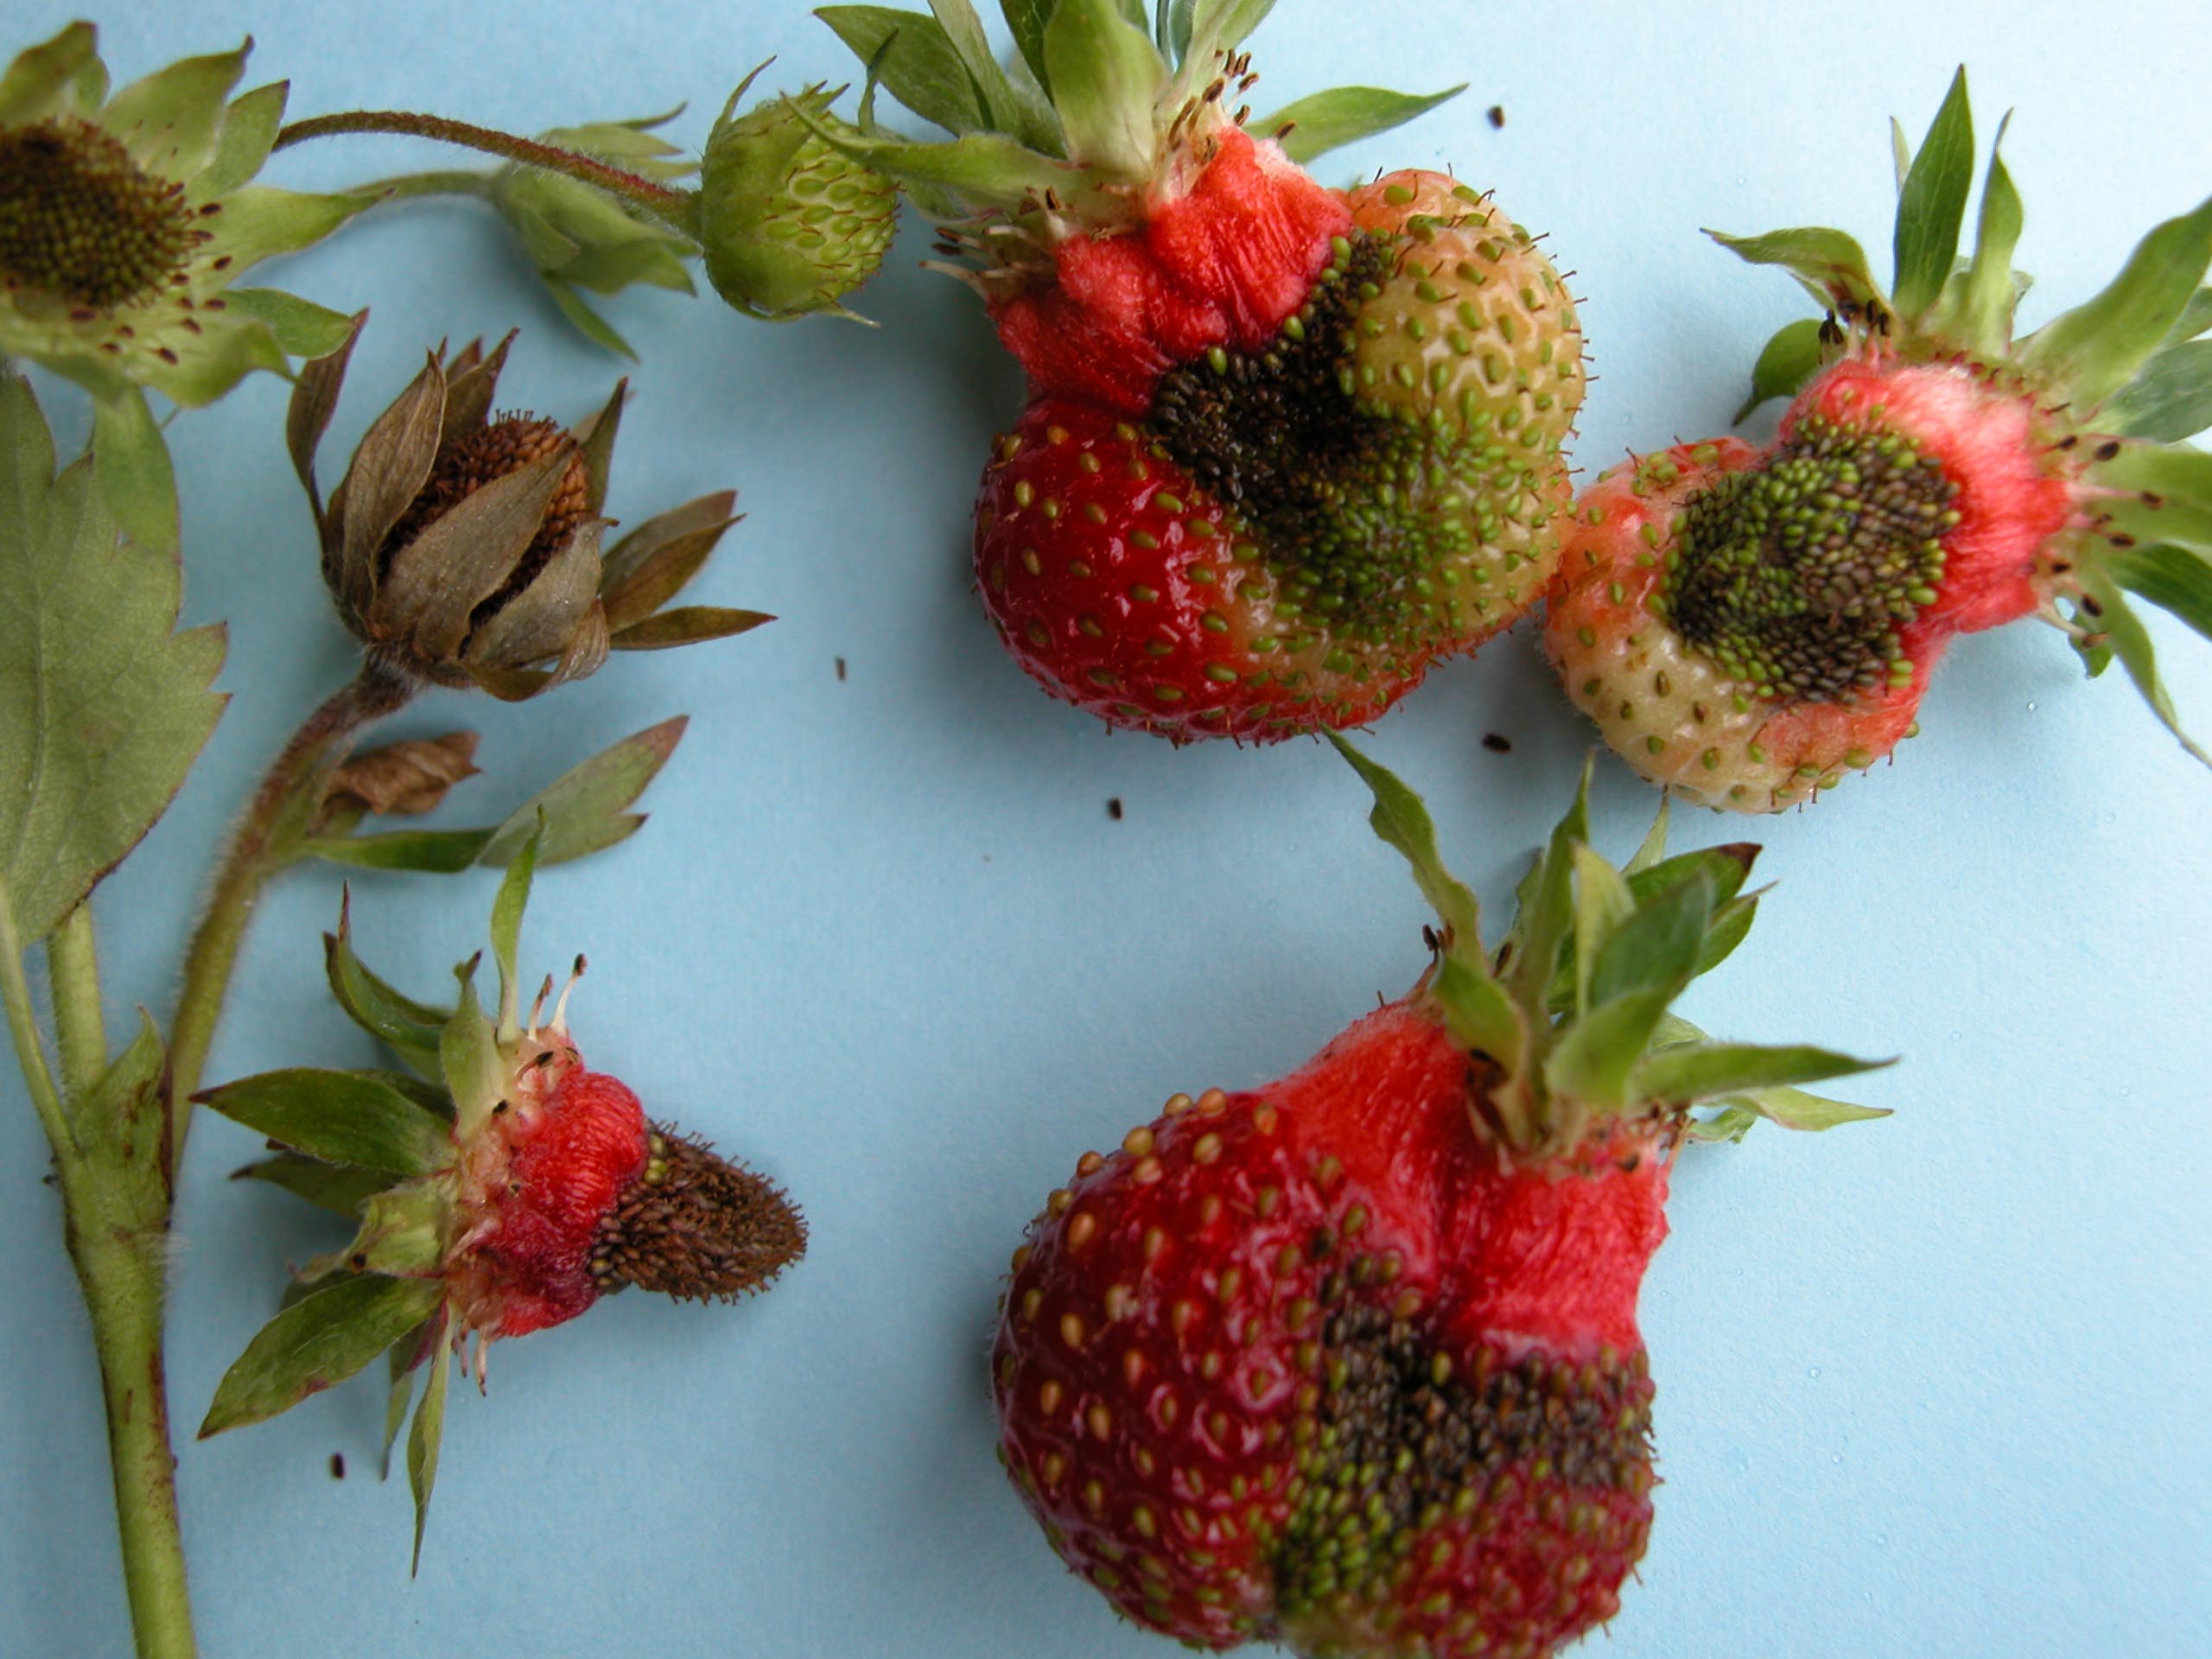 Strawberries with blackened “pinched-in” areas. Damaged areas appear dry and shriveled.